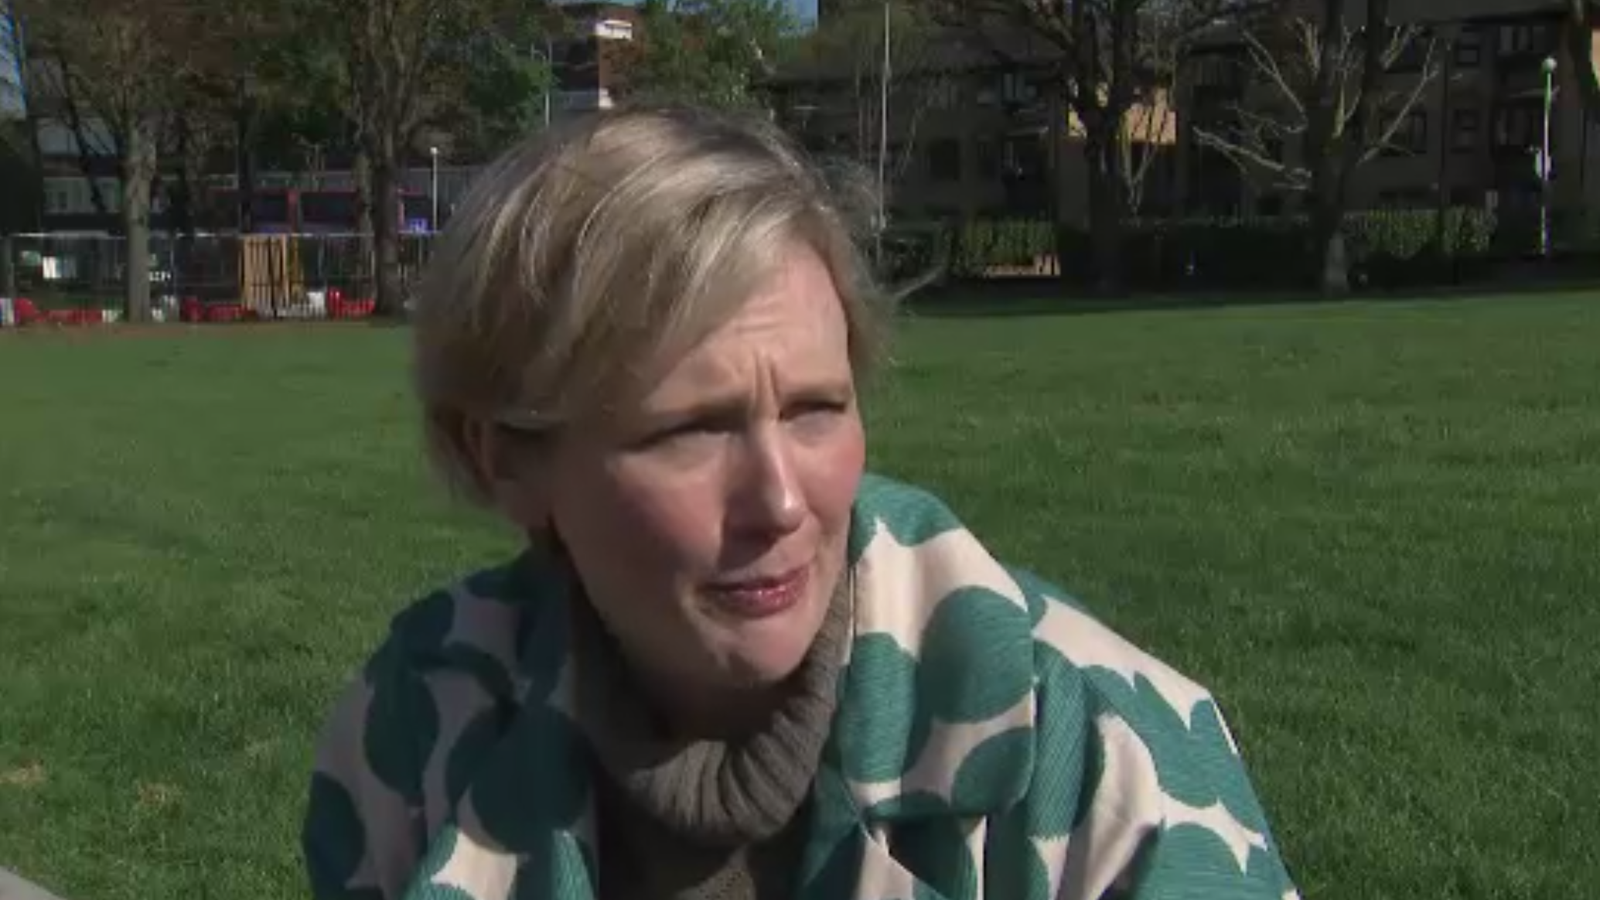 Stella Creasy: Labour MP says police giving 'green light' to trolls after man tried to get her kids taken away